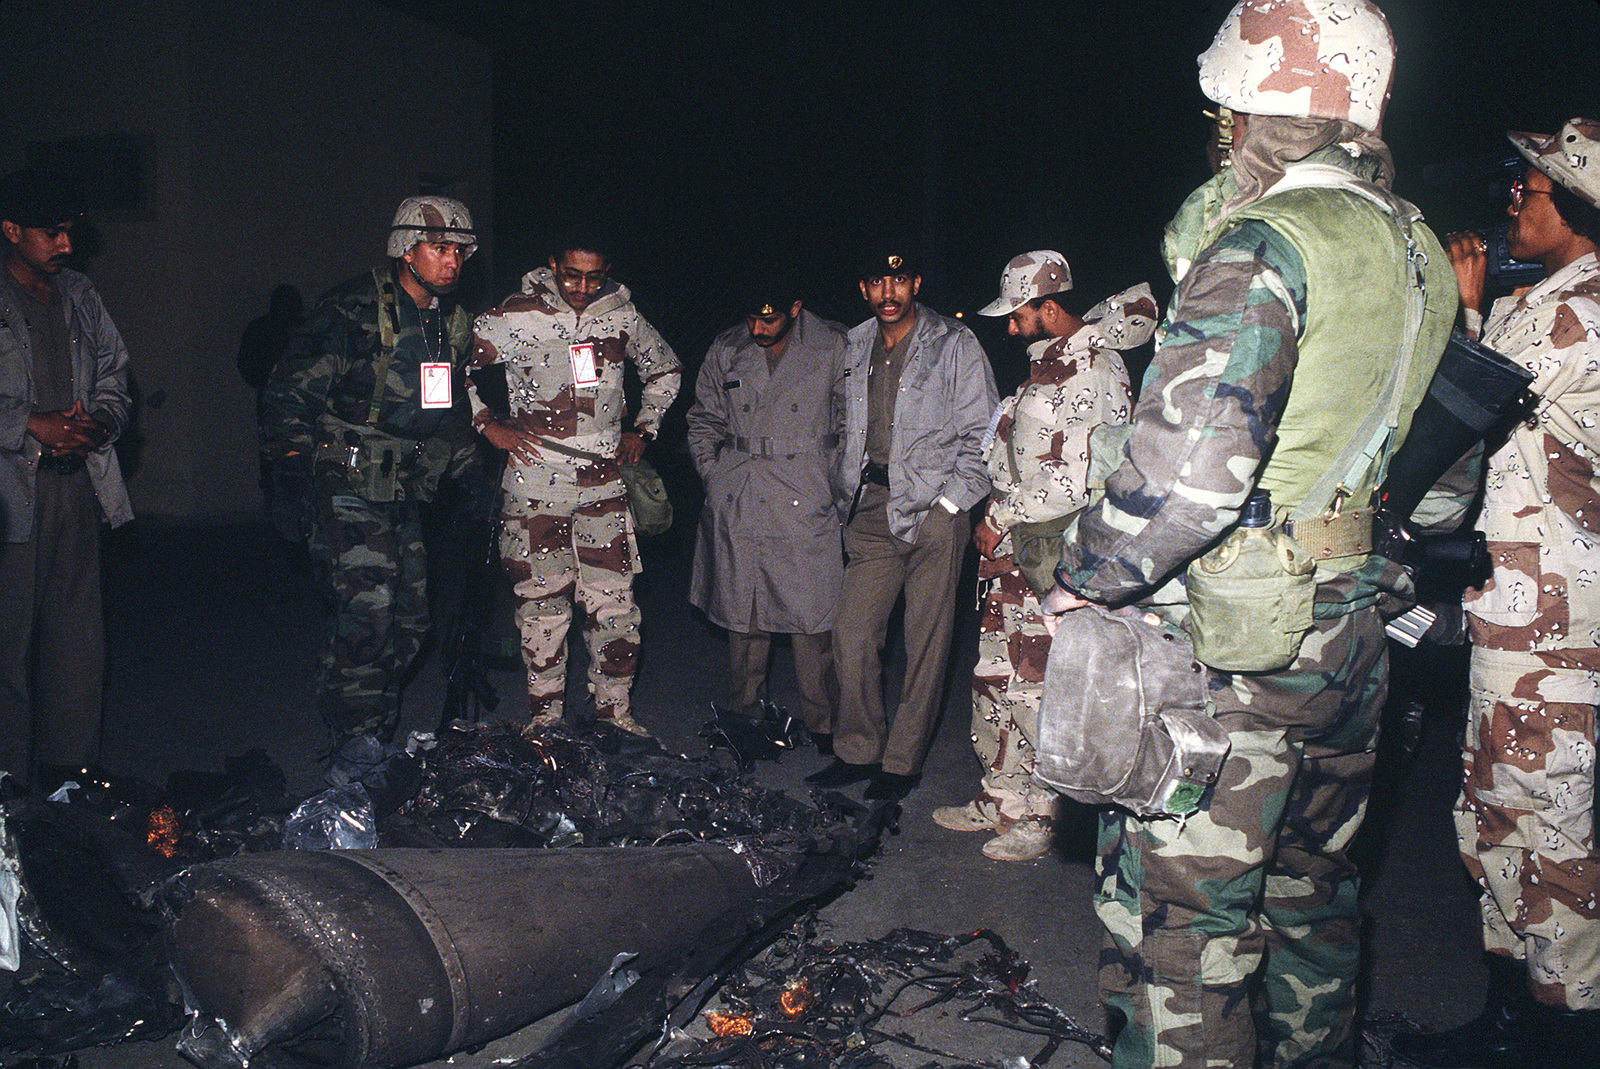 us-and-saudi-arabian-military-personnel-gather-around-the-remains-of-an-iraqi-578595-1600.jpg